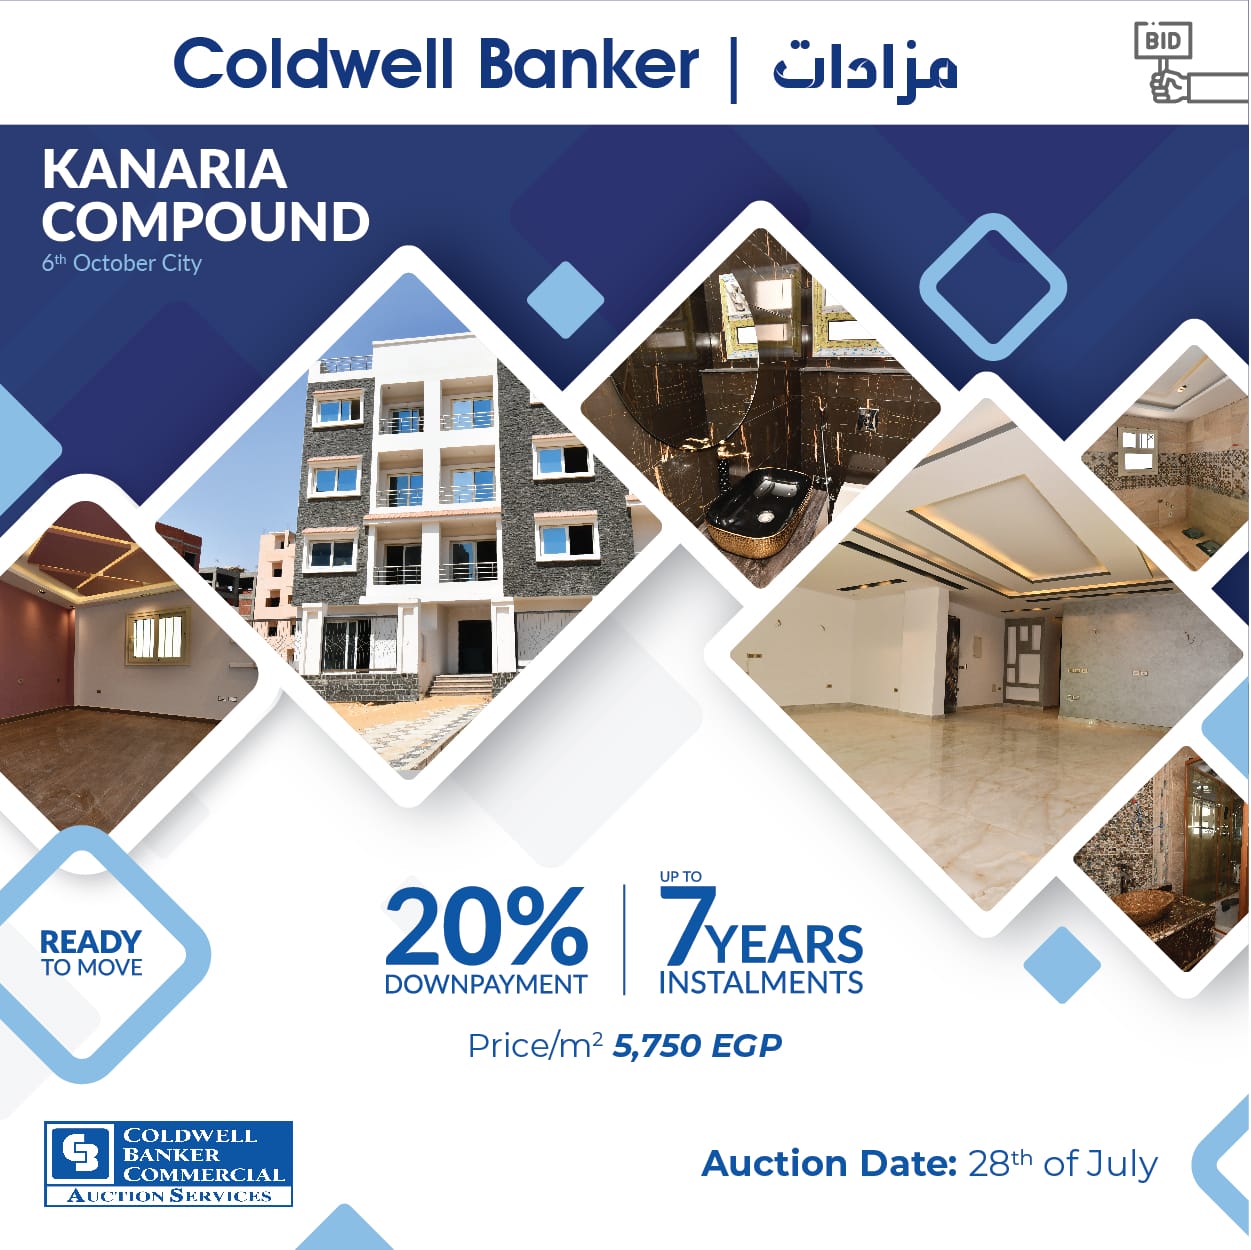 Residential Auction Announcement: Coldwell Banker Auctions on 28th July